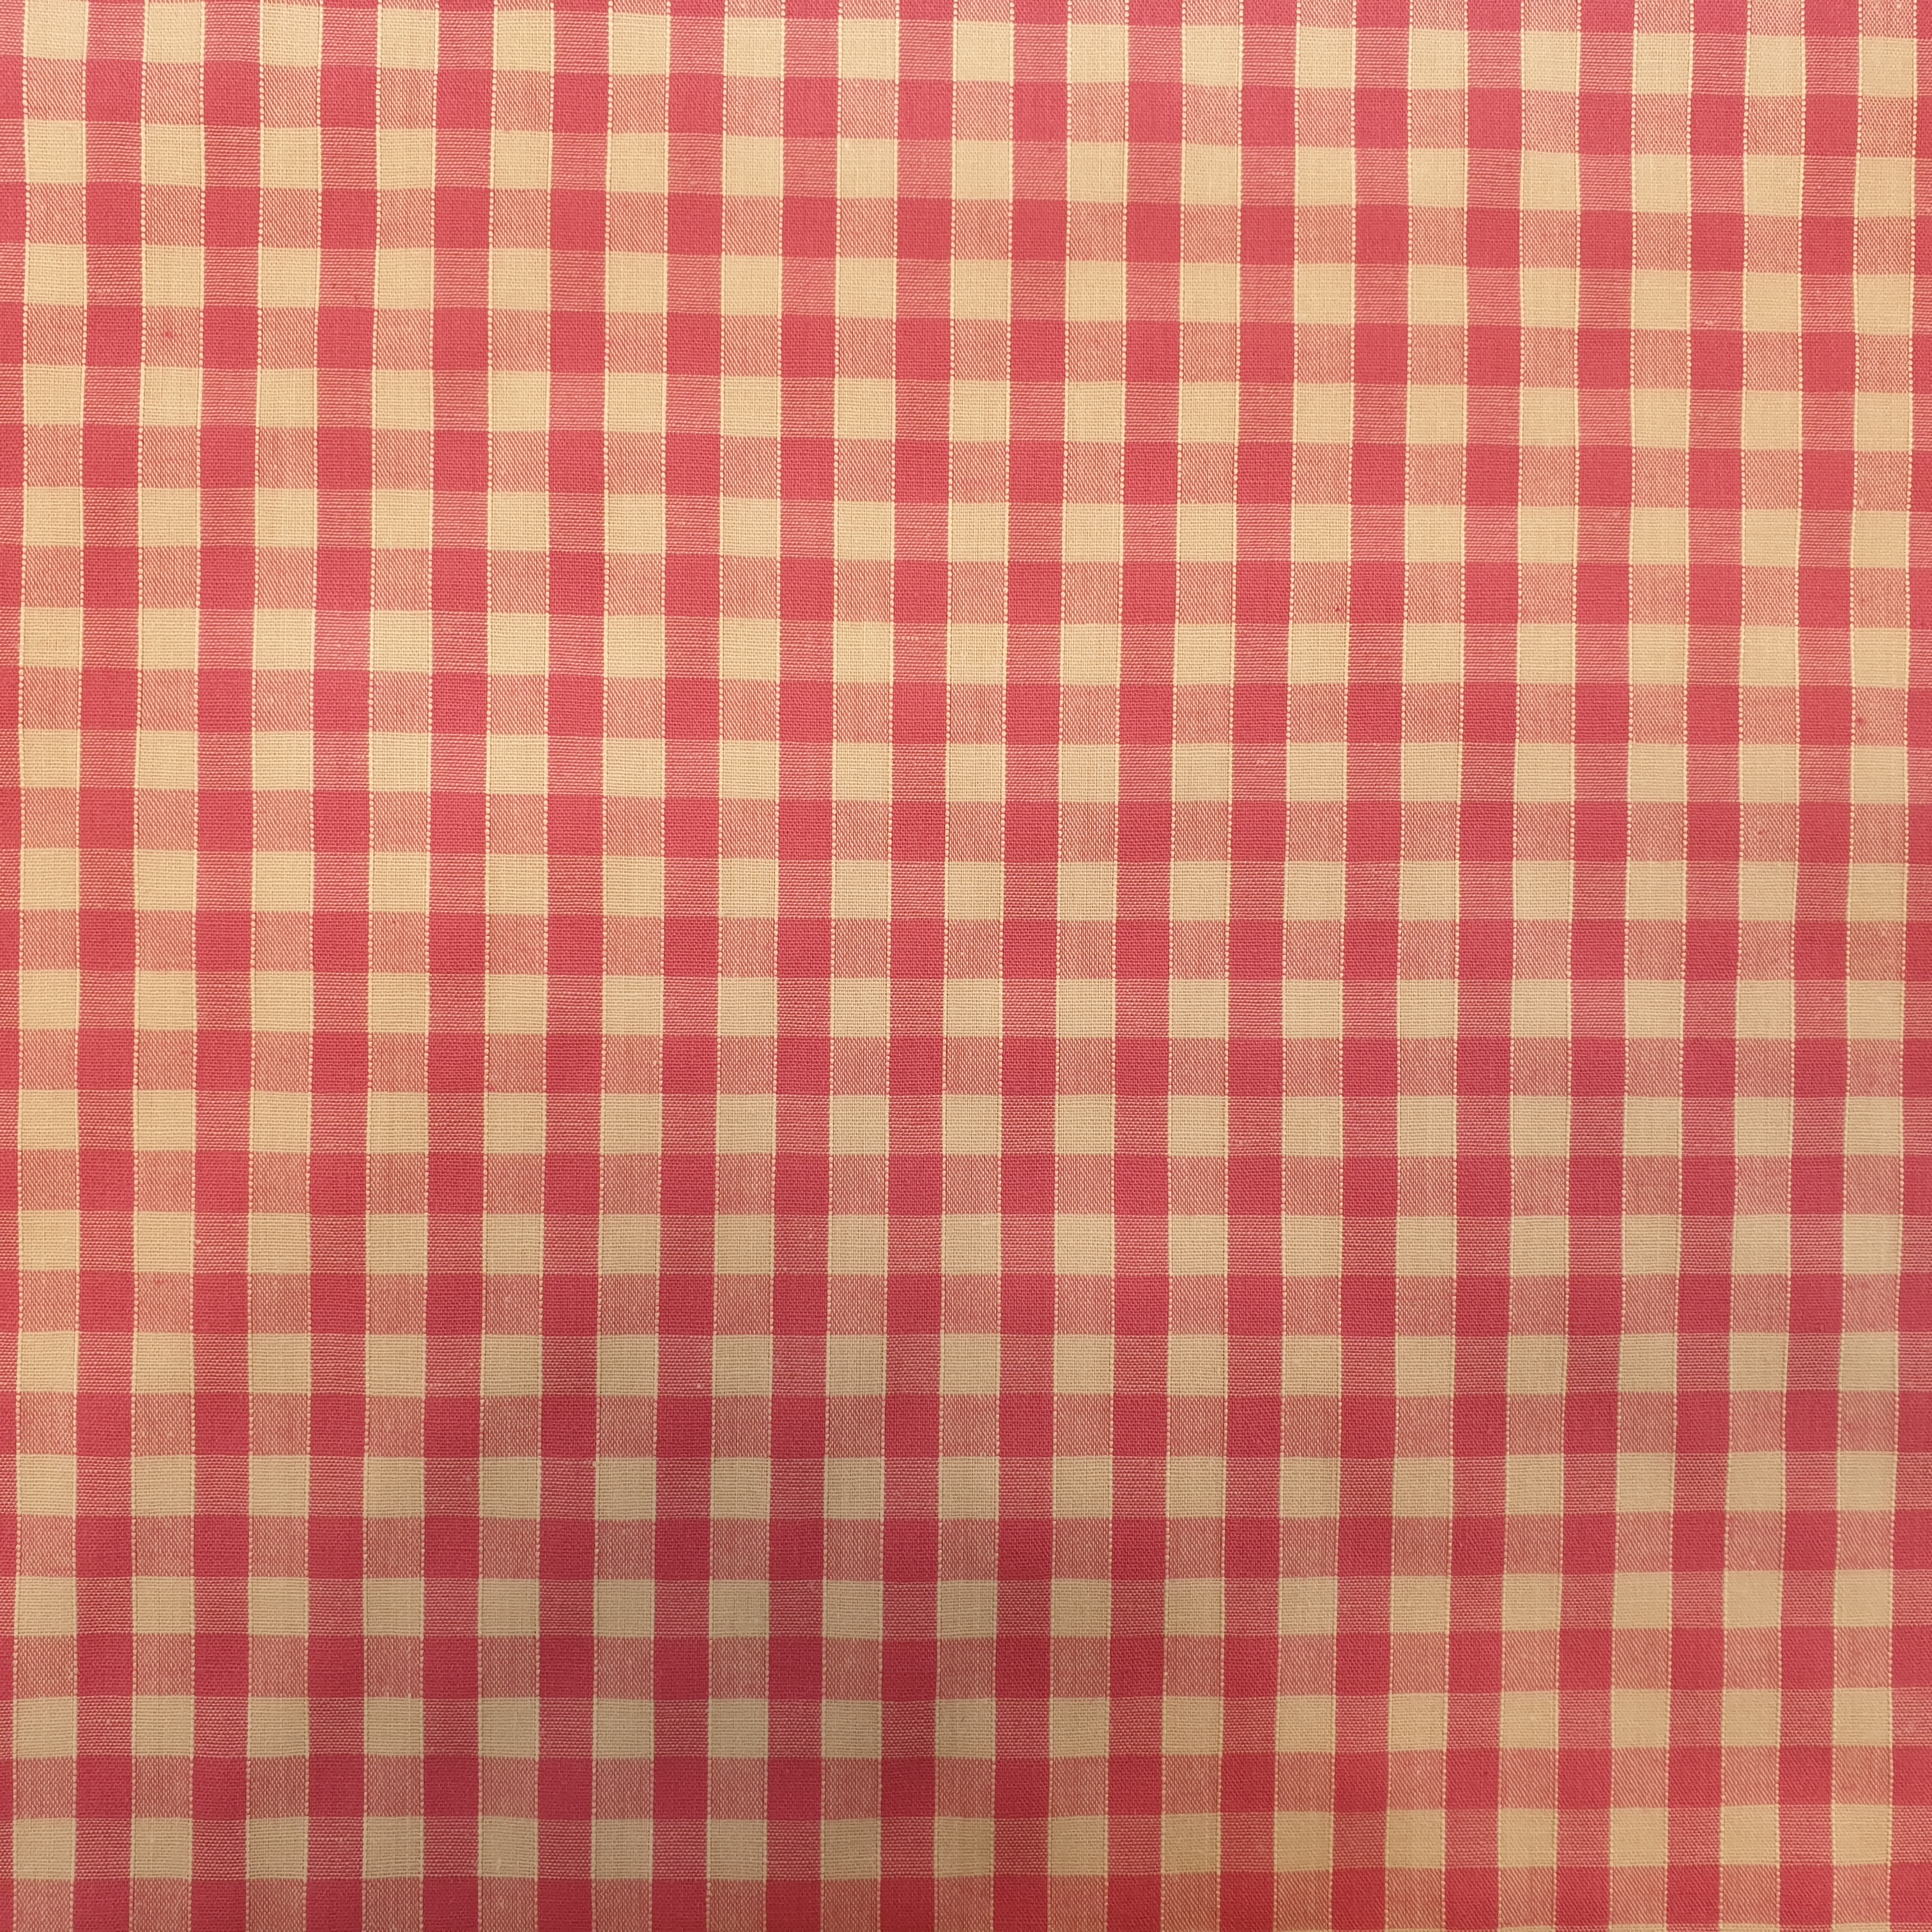 1/4 ''  Polycotton Gingham RED